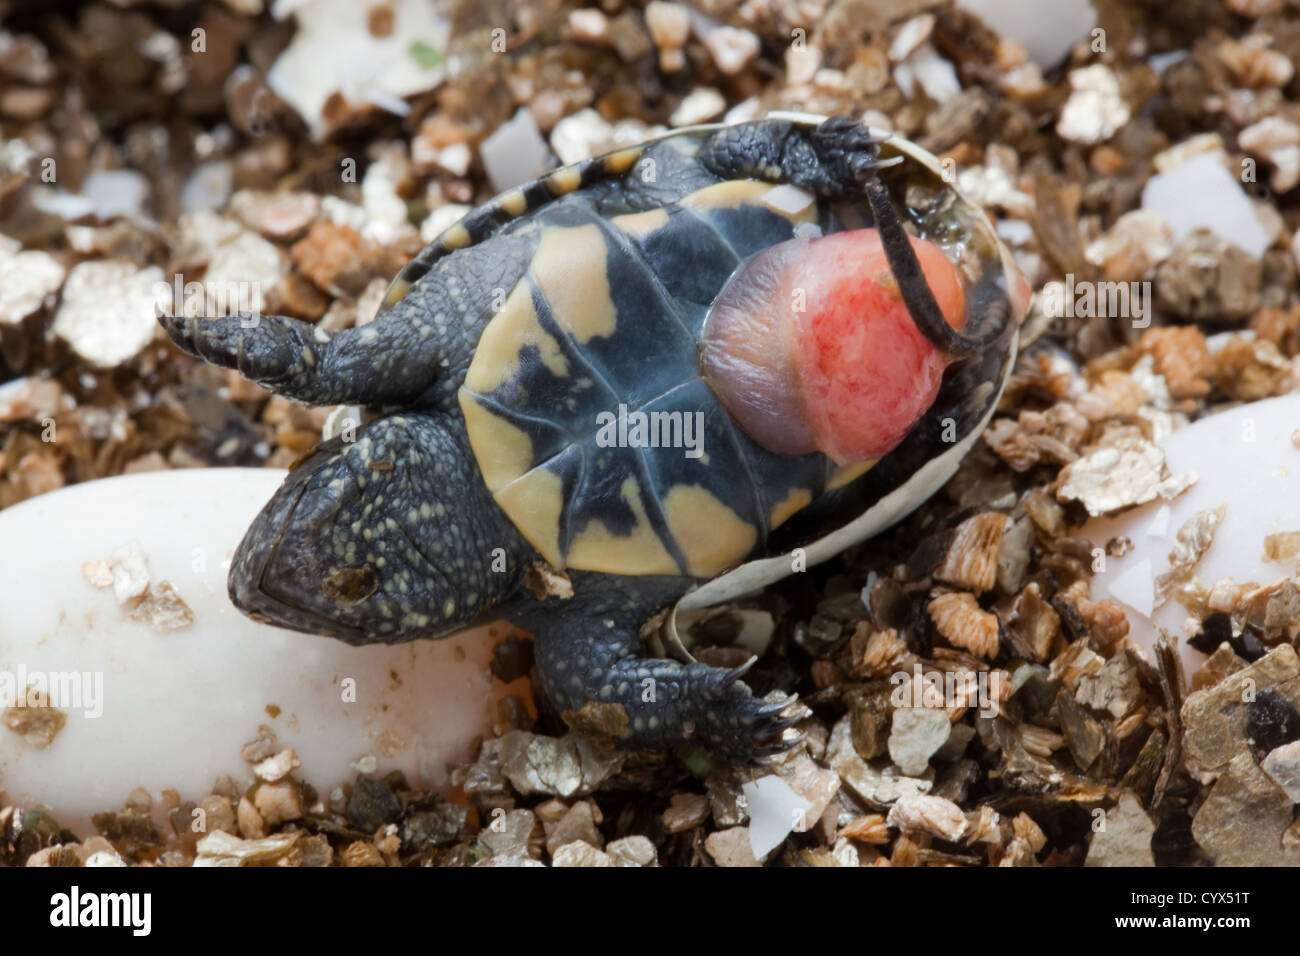 Europen Pond Terrapin (Emys orbicularis). Hatchling on its side showing plastron with umbilicus still to be retracted into body. Stock Photo